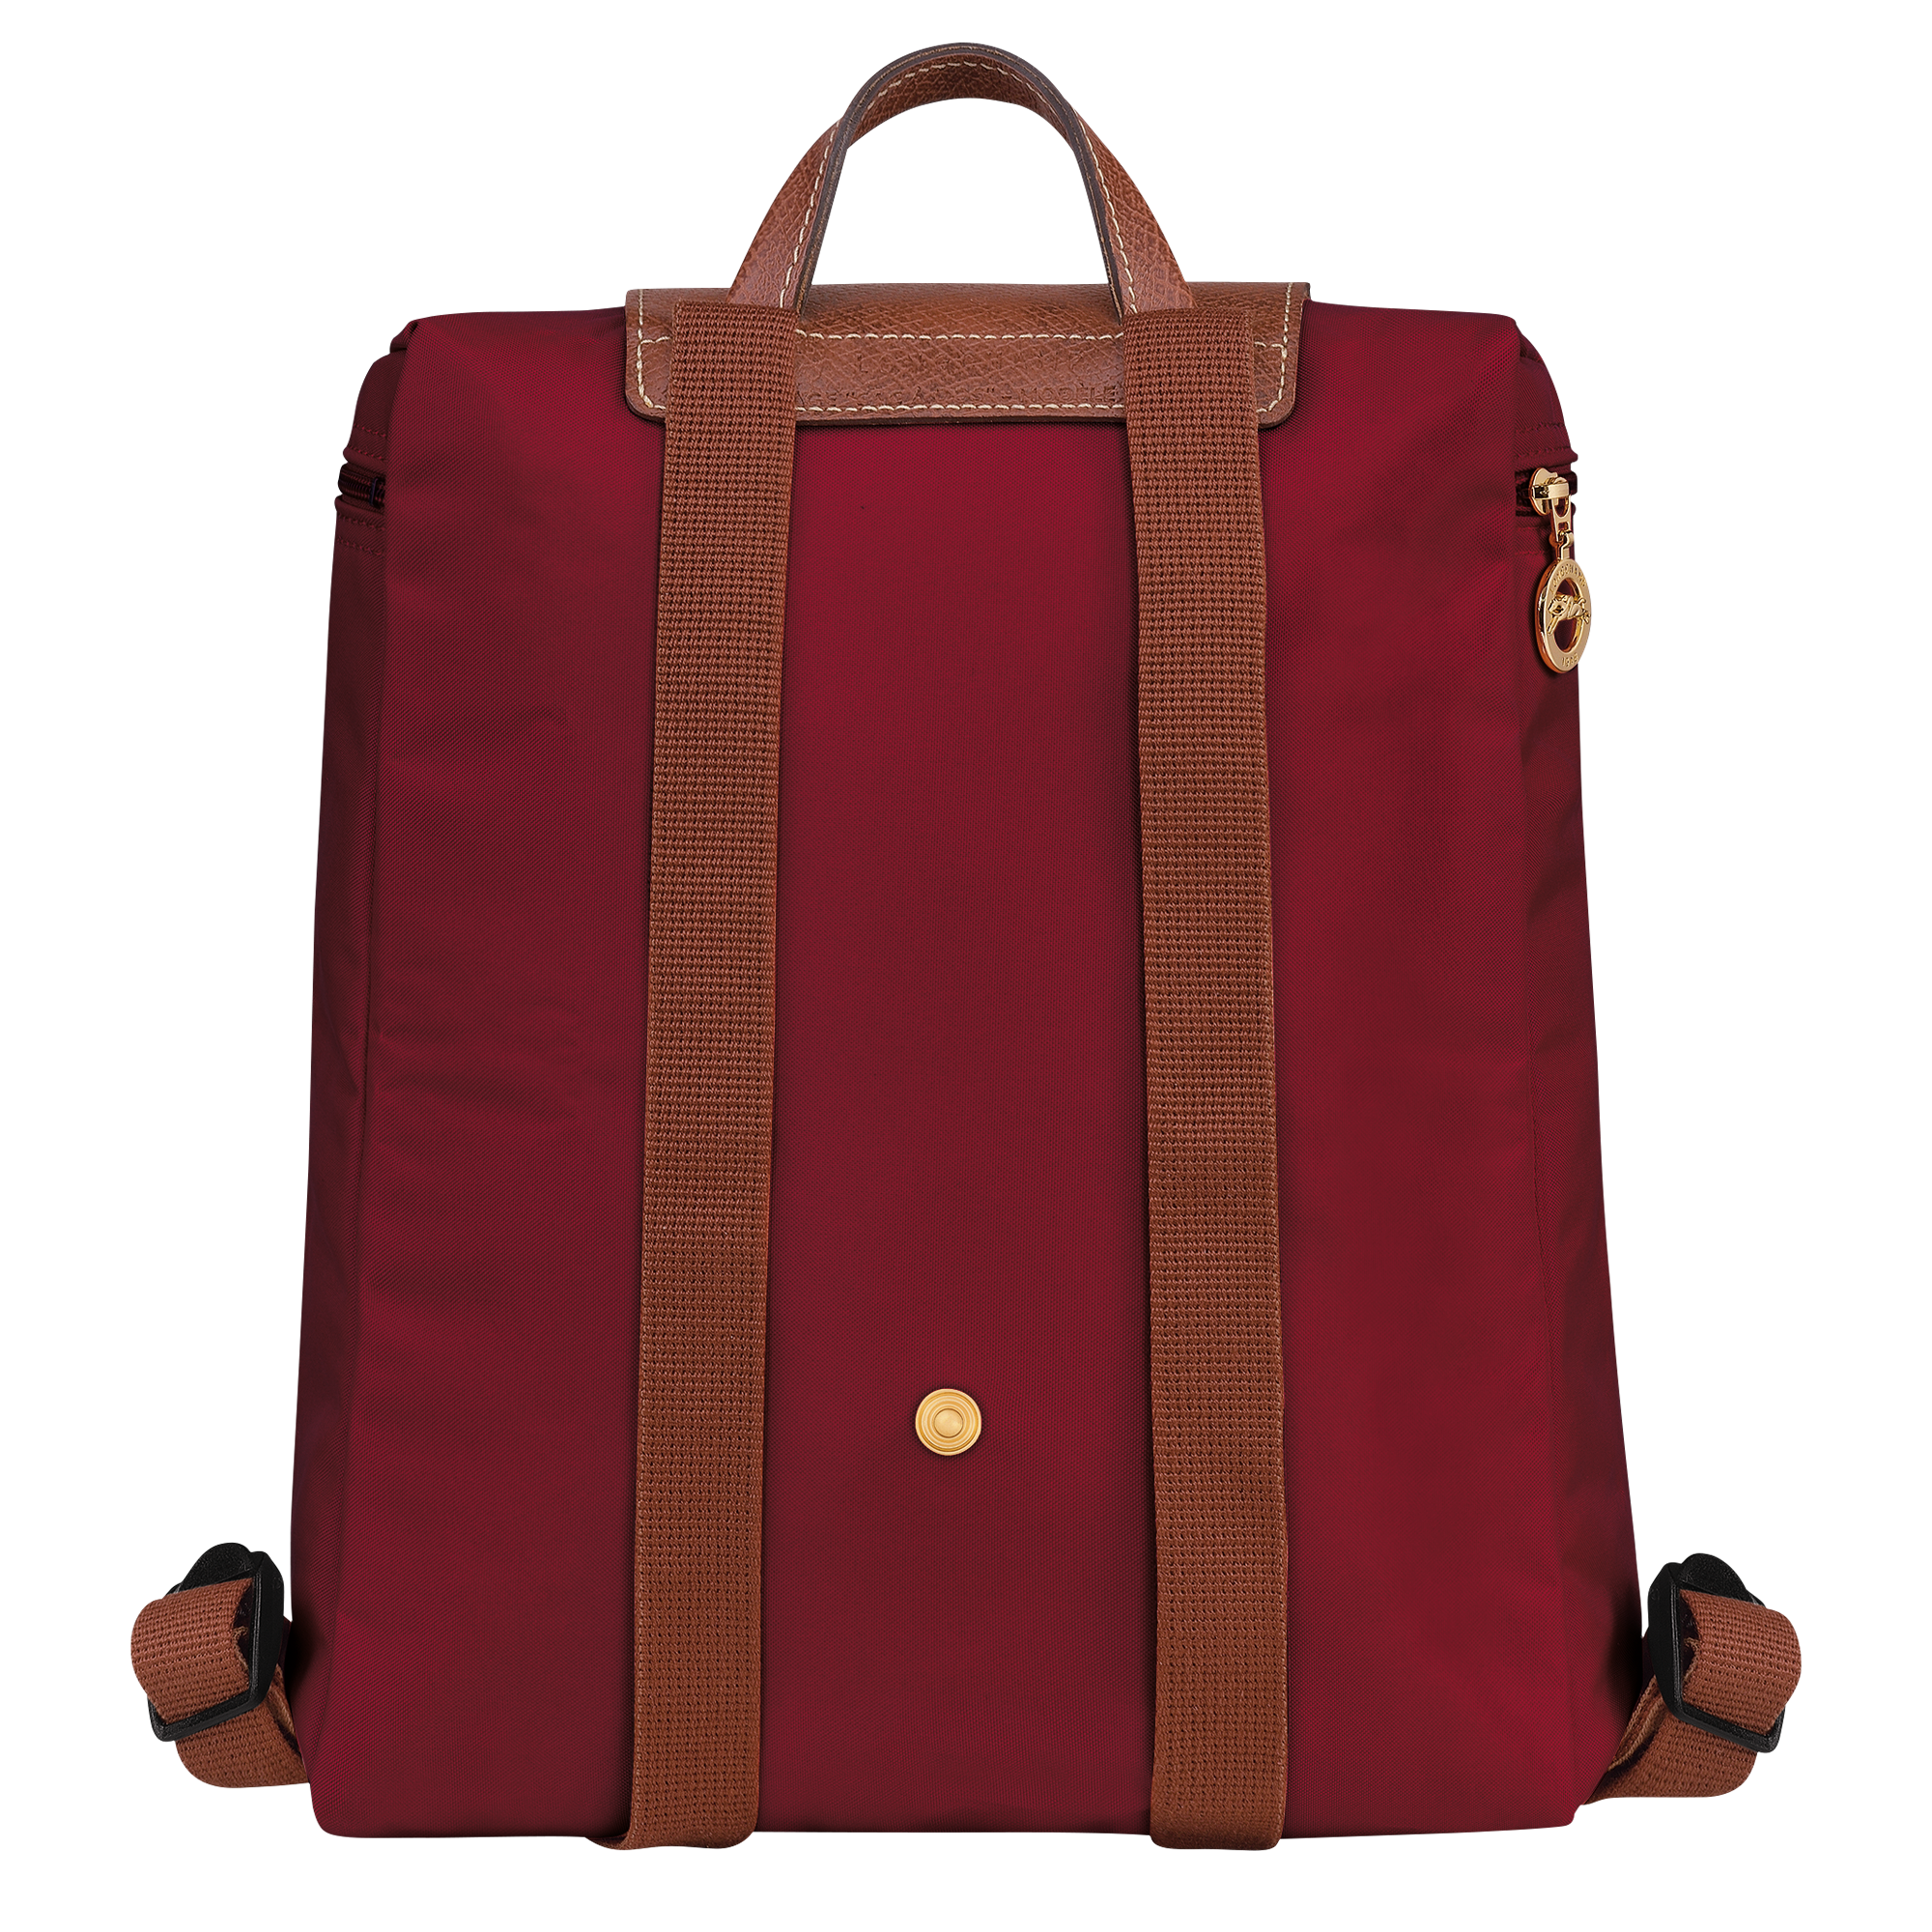 Longchamp LE PLIAGE ORIGINAL - Backpack in Red - 2 (SKU: L1699089P59)